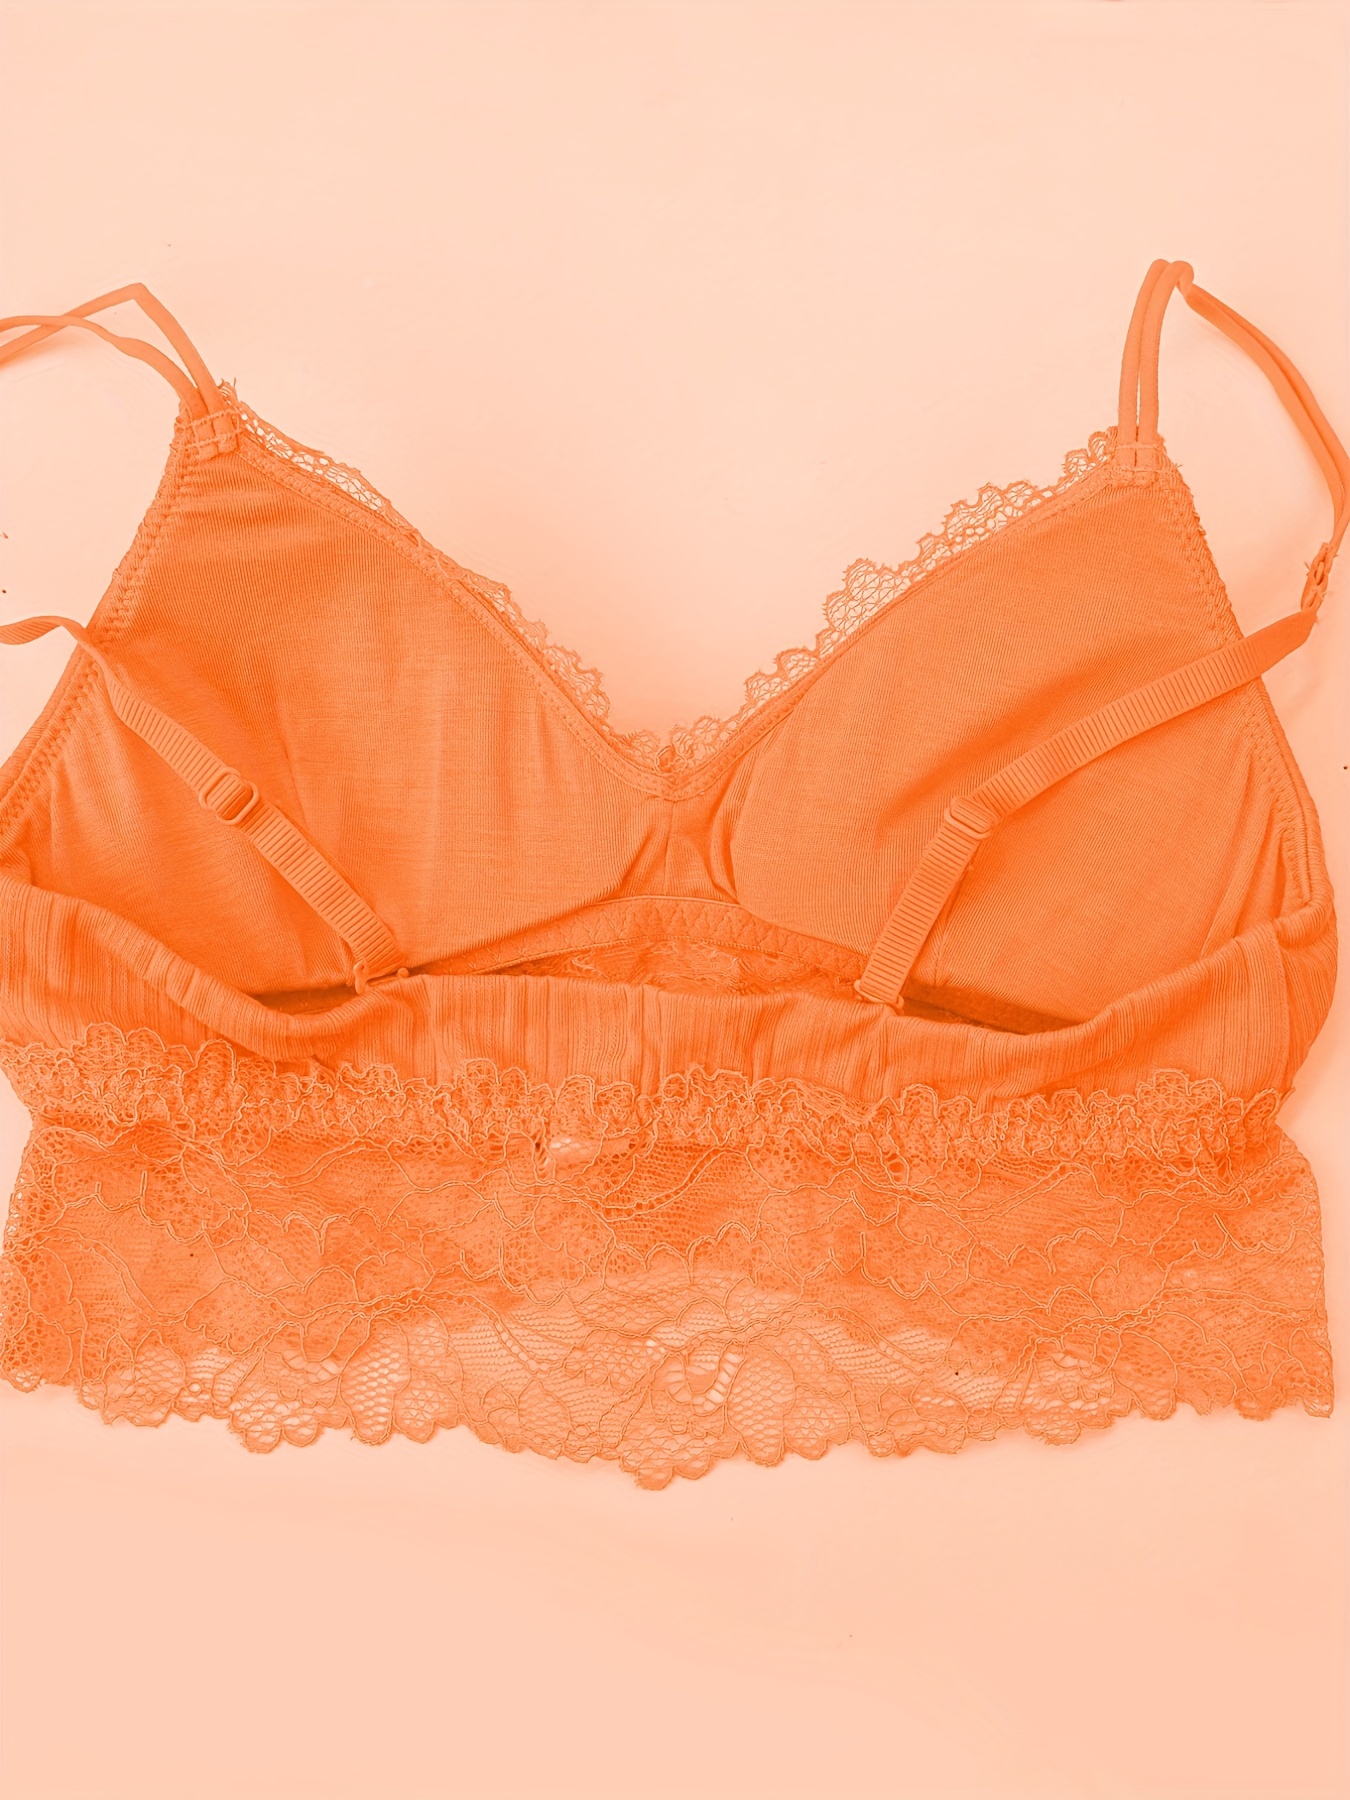 Victoria's Secret PINK BY VICTORIAS SECRET LACE PUSH-UP BRALETTE Size XS -  $23 - From Millers